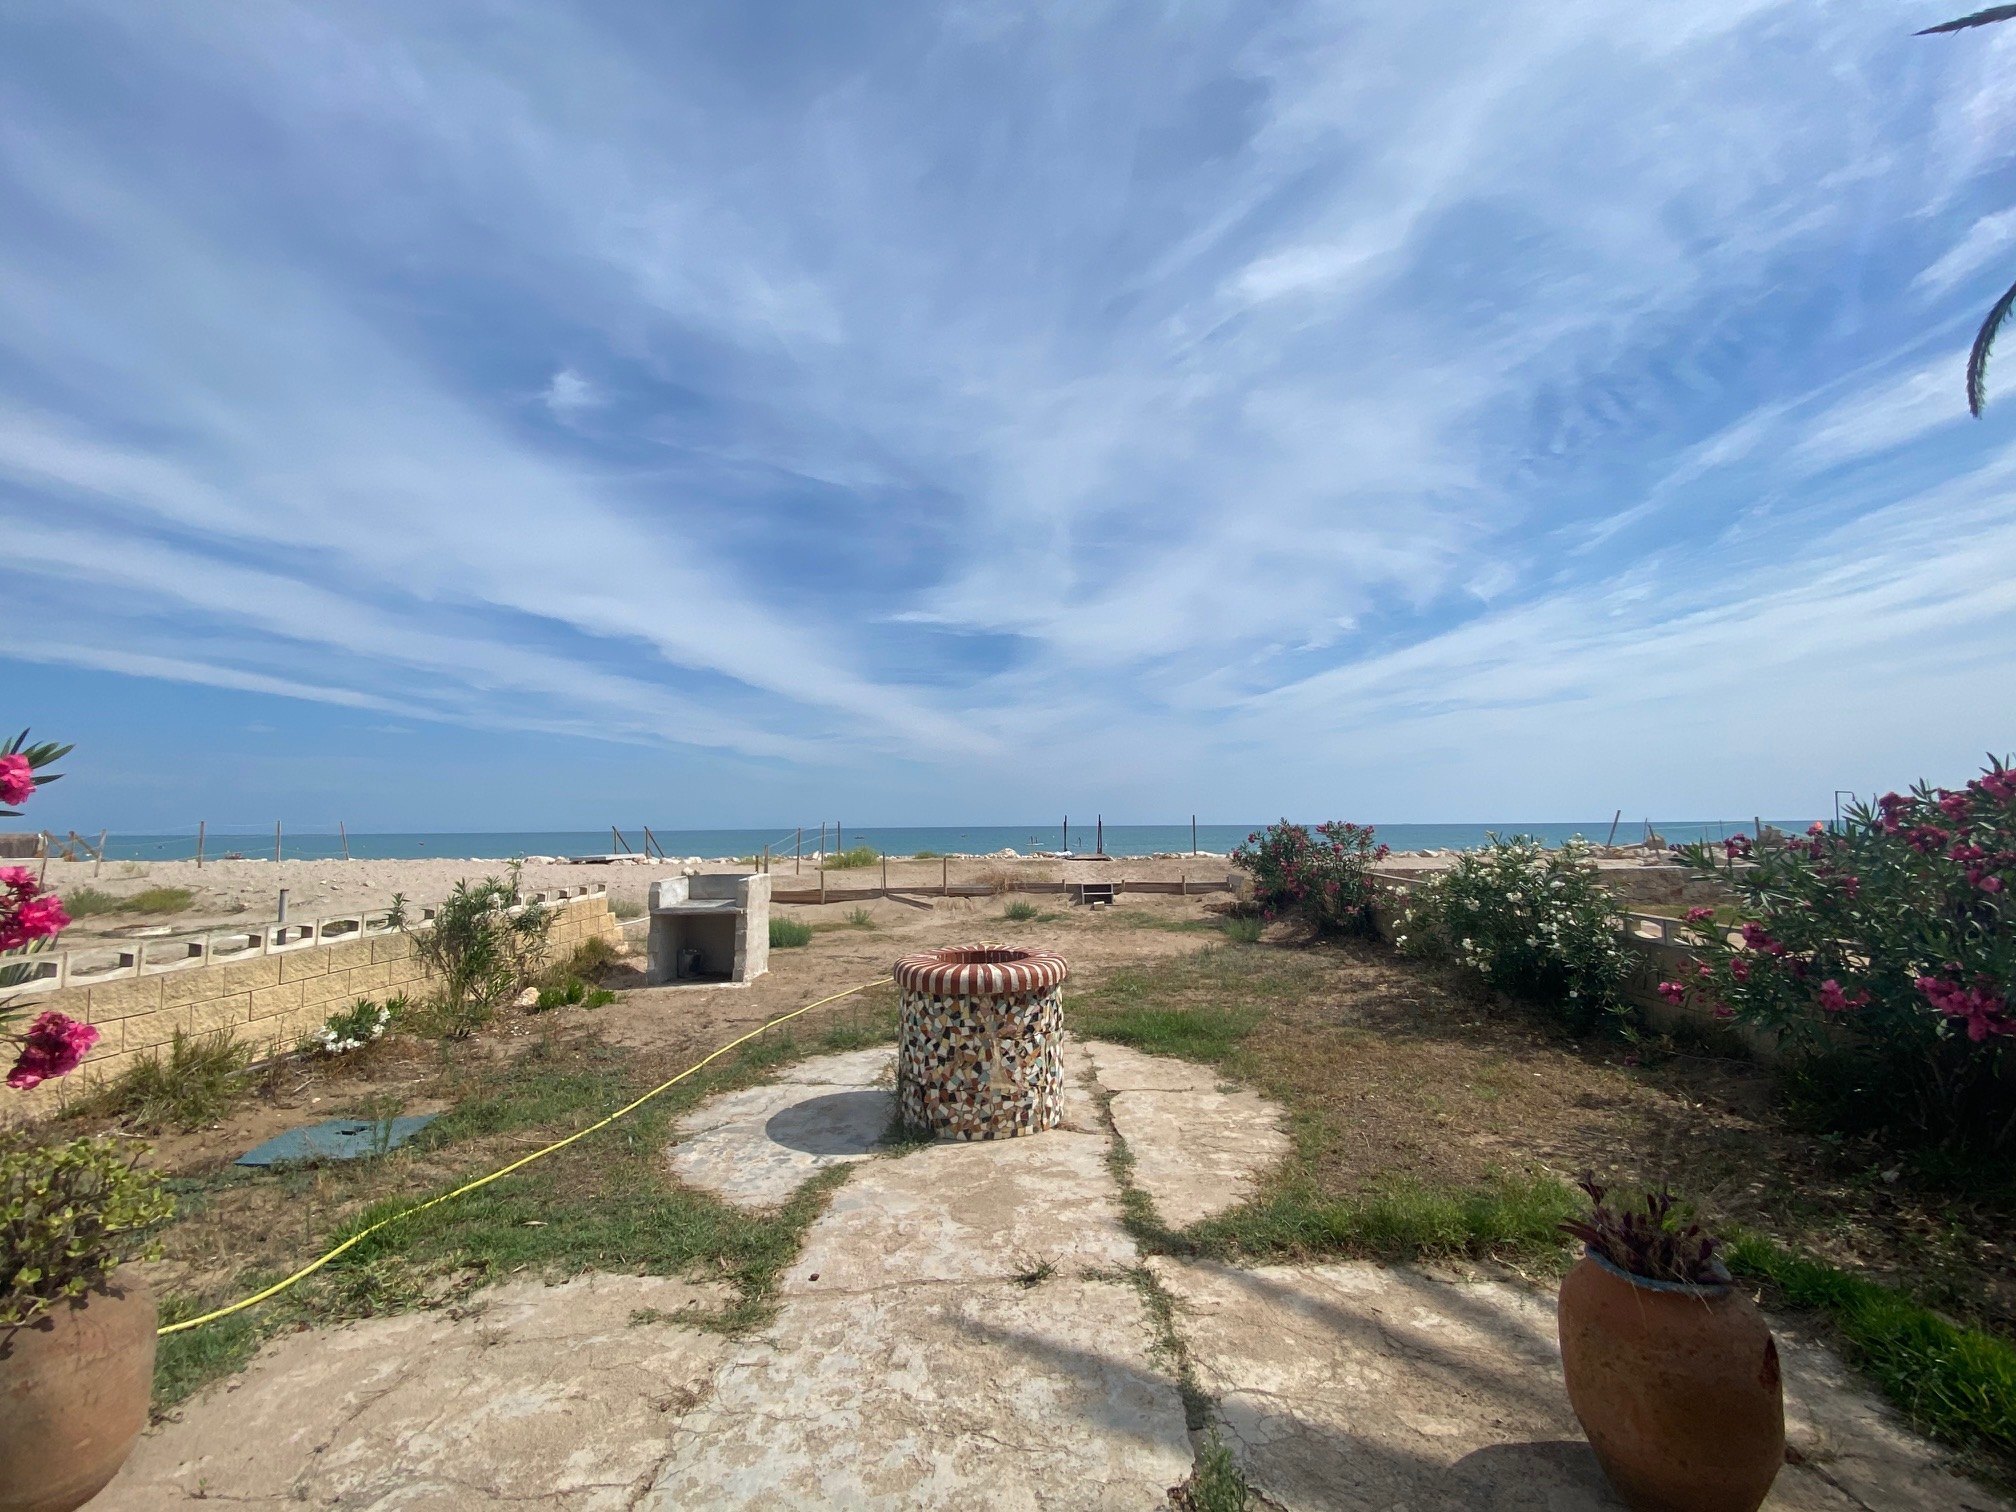 Detached villa in the first line of the beach with sea views